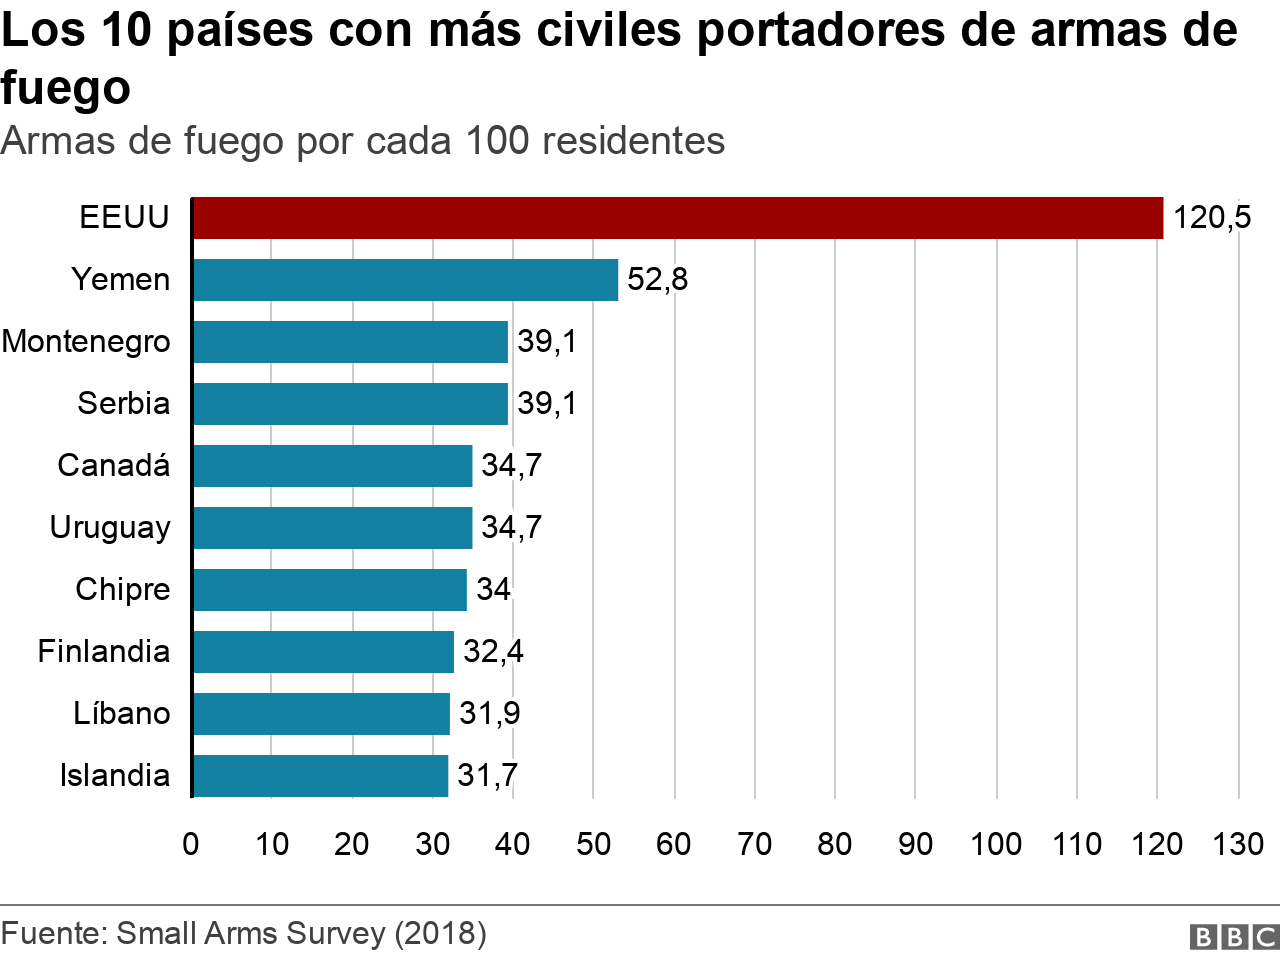 The 10 countries with the most civilians carrying firearms.